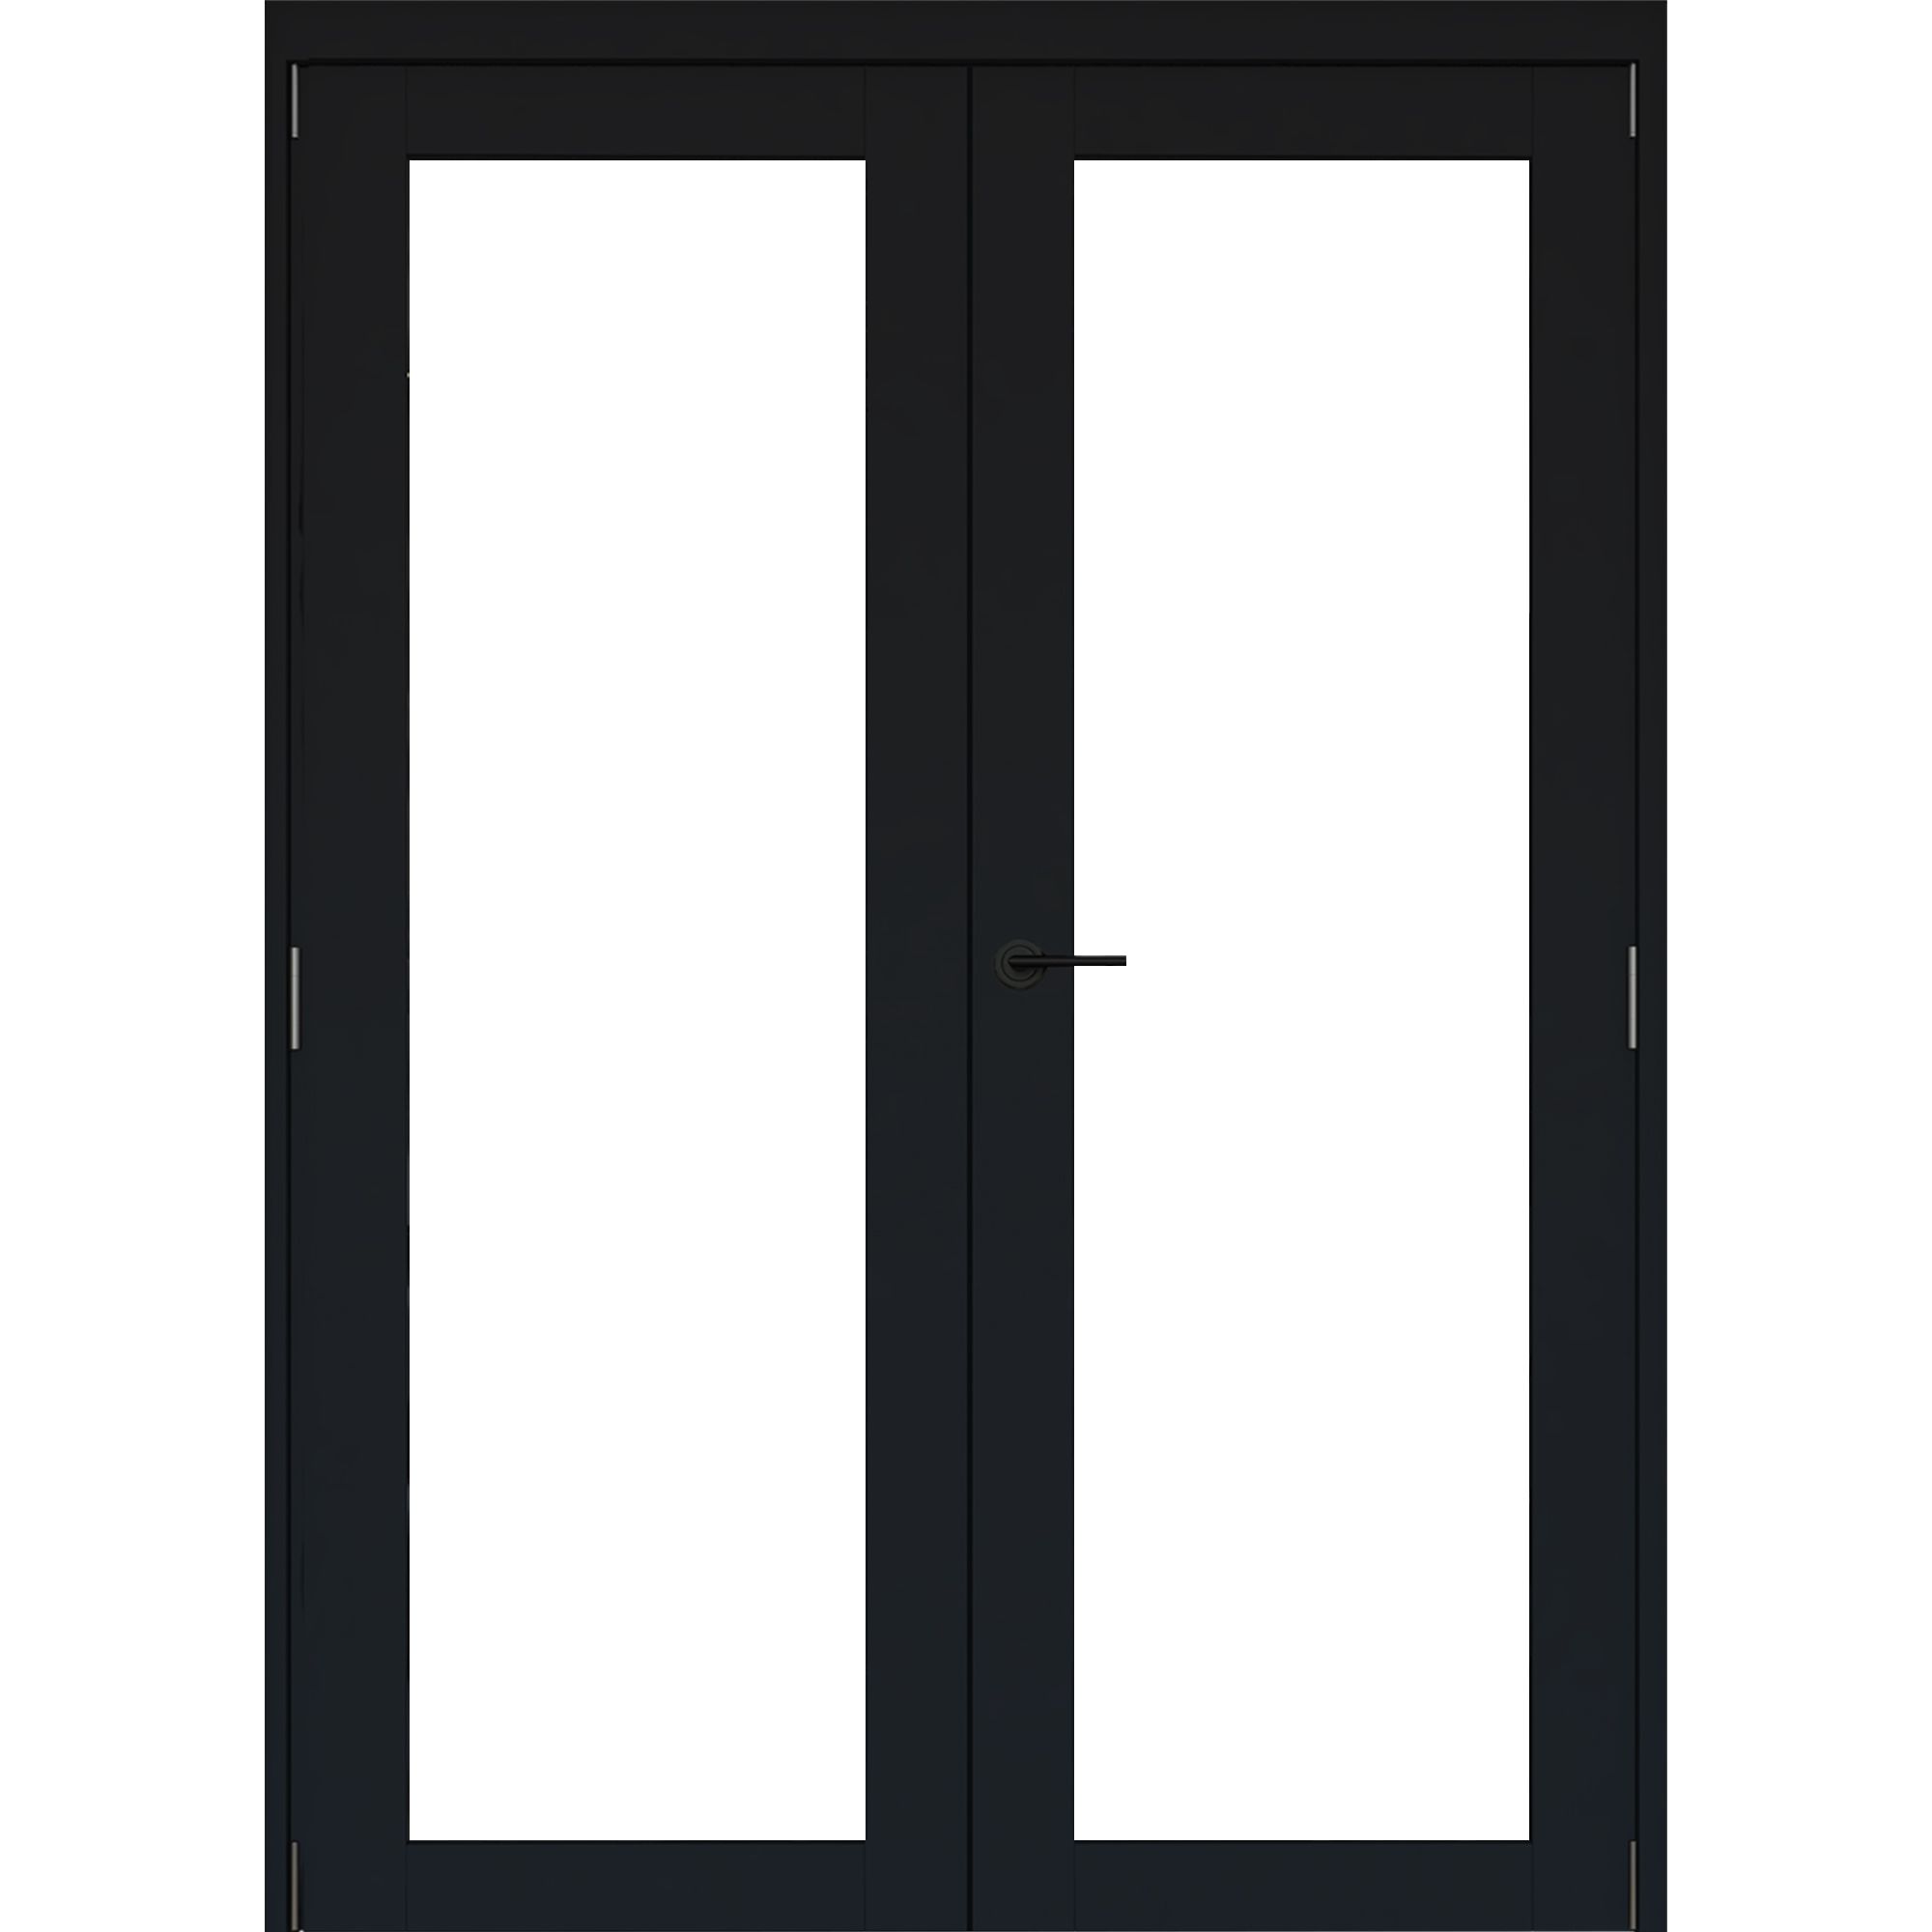 1 panel 1 Lite Clear Fully glazed Timber Black Internal French door set 2017mm x 133mm x 1445mm - Fully Finished